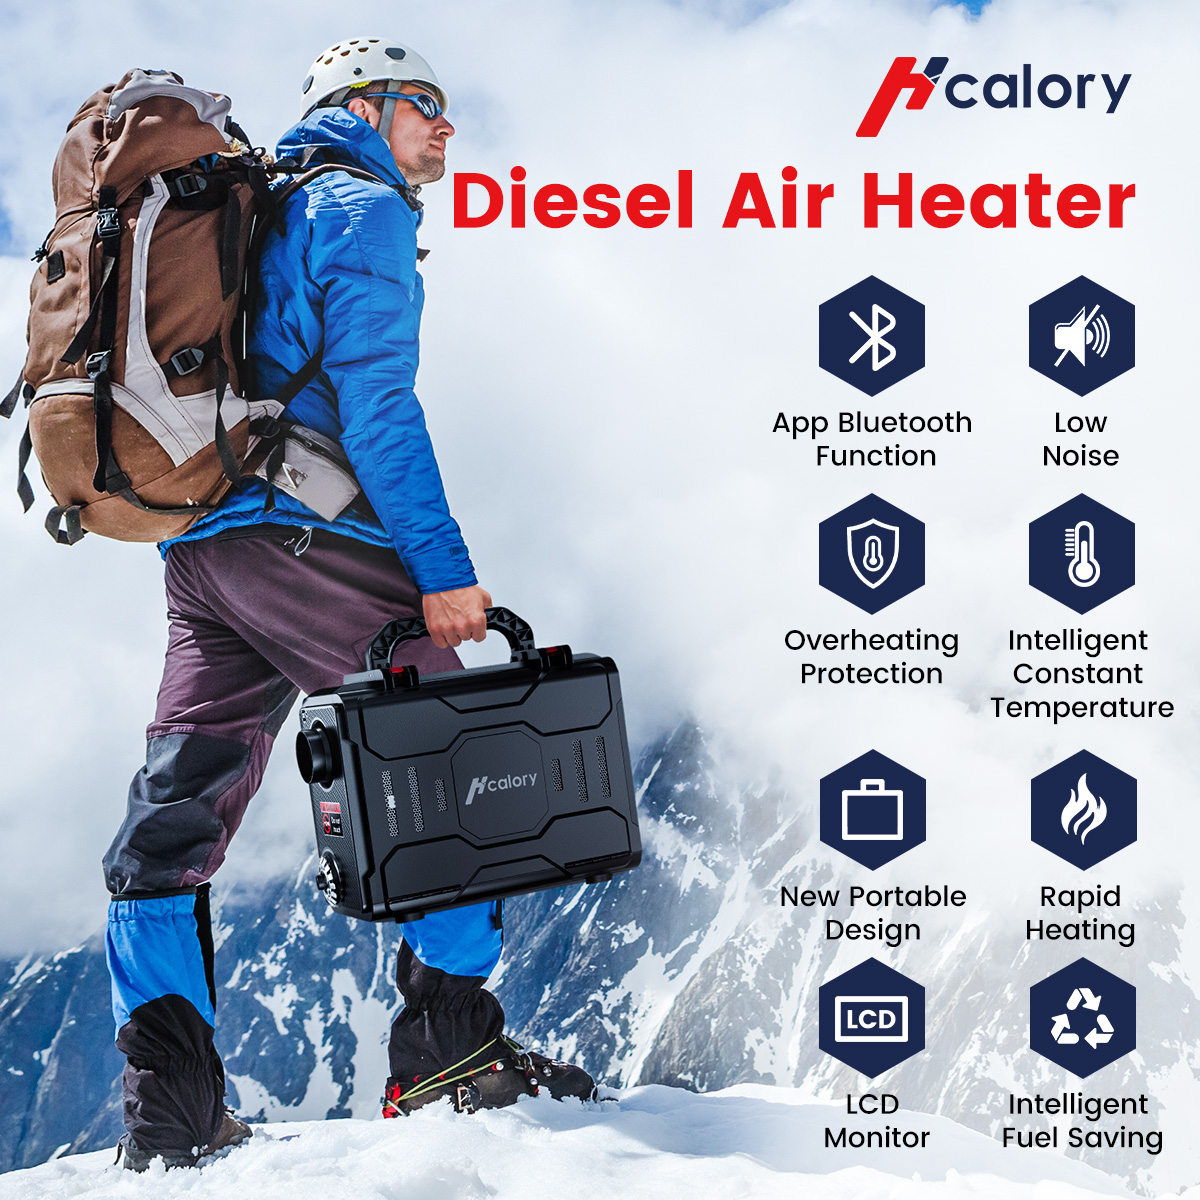 HCALORY Diesel Air Heater, 12V DC & 110V AC 5KW-8KW Horizontal All-In-One  Portable Parking Heater with Bluetooth APP Control for Car Trucks Boat RV